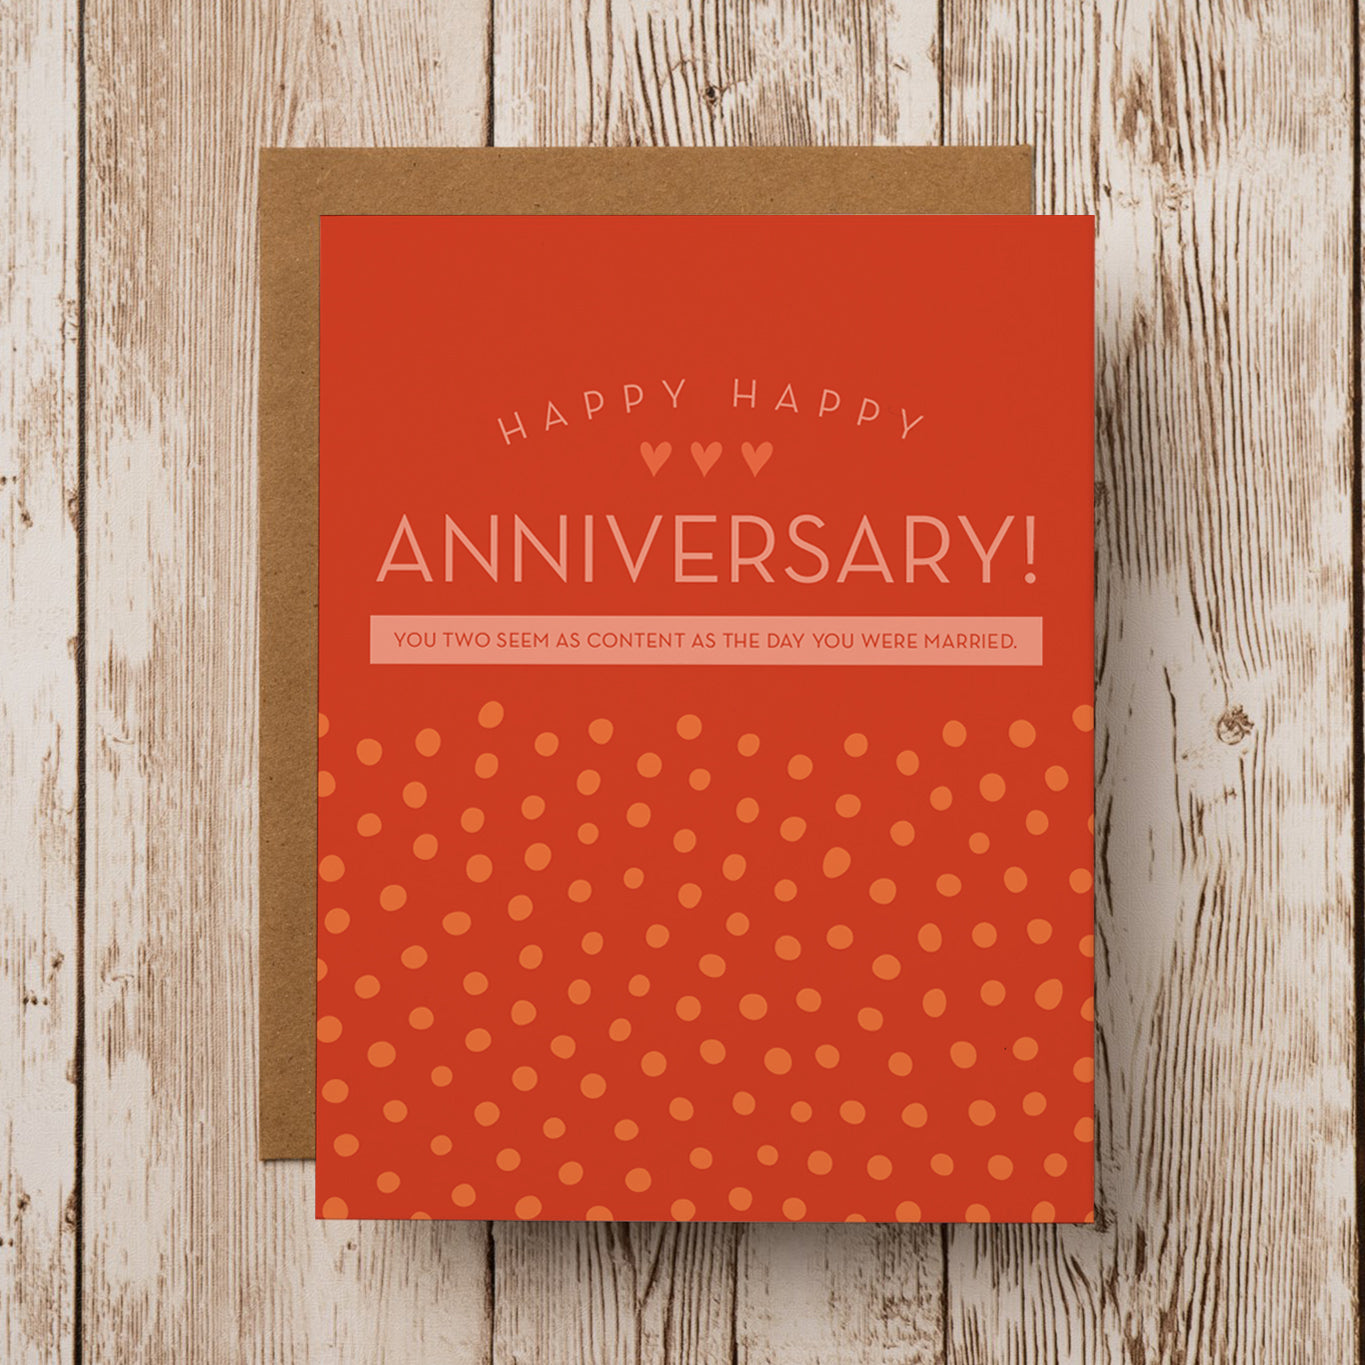 A funny and honest anniversary greeting card that reads "Happy happy anniversary! You two seem as content as the day you were married."